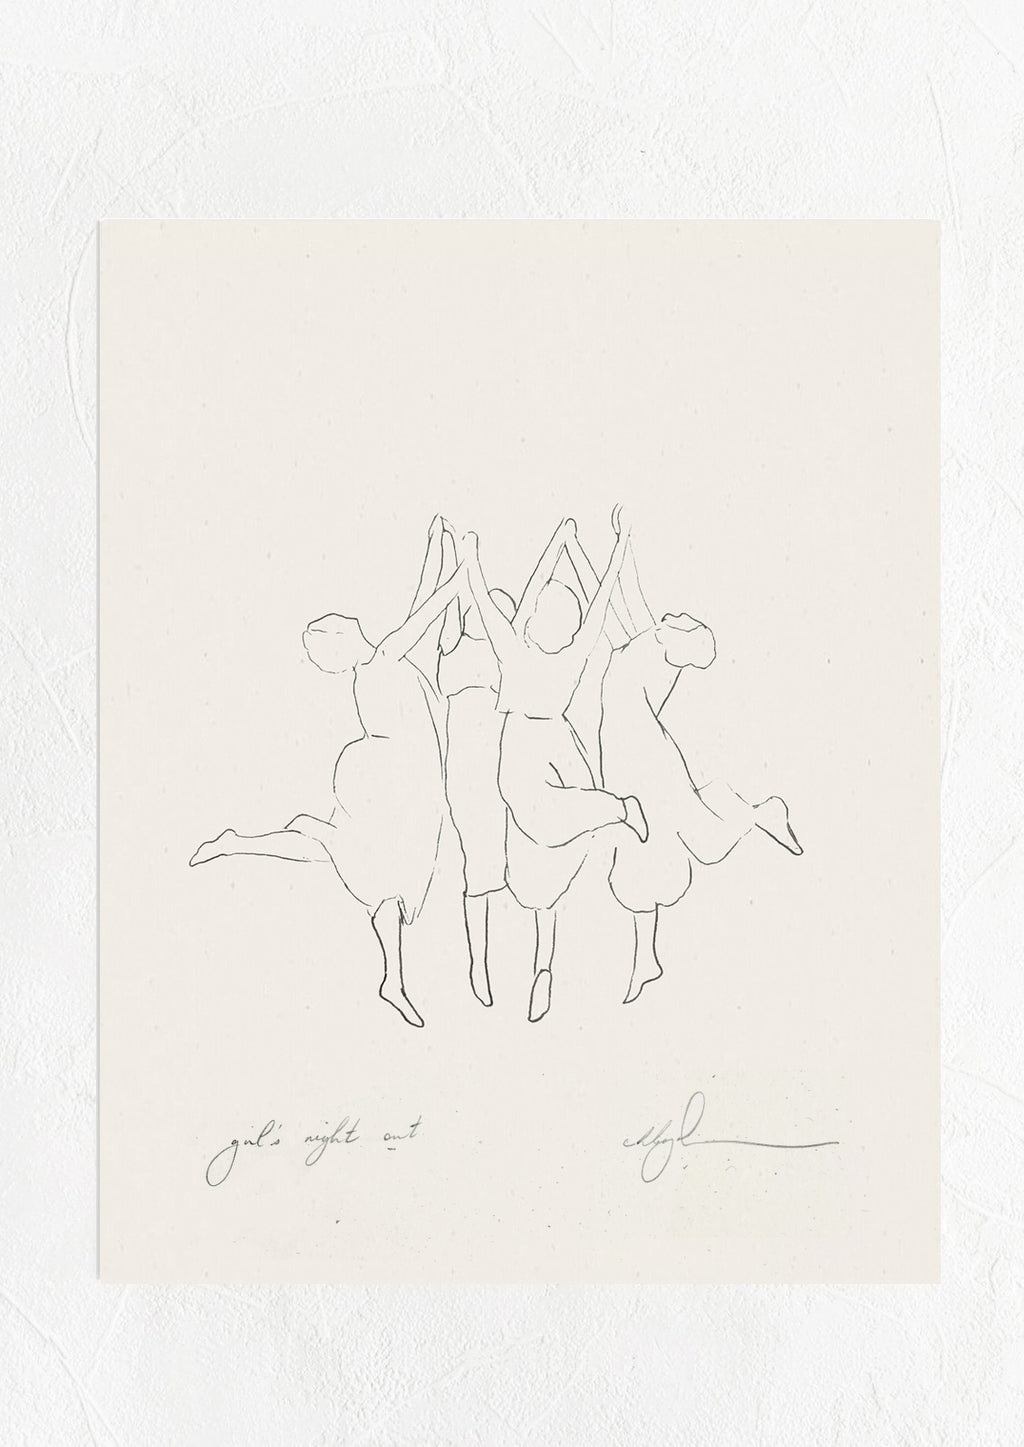 1: An art print with black line drawing of women dancing in a circle.